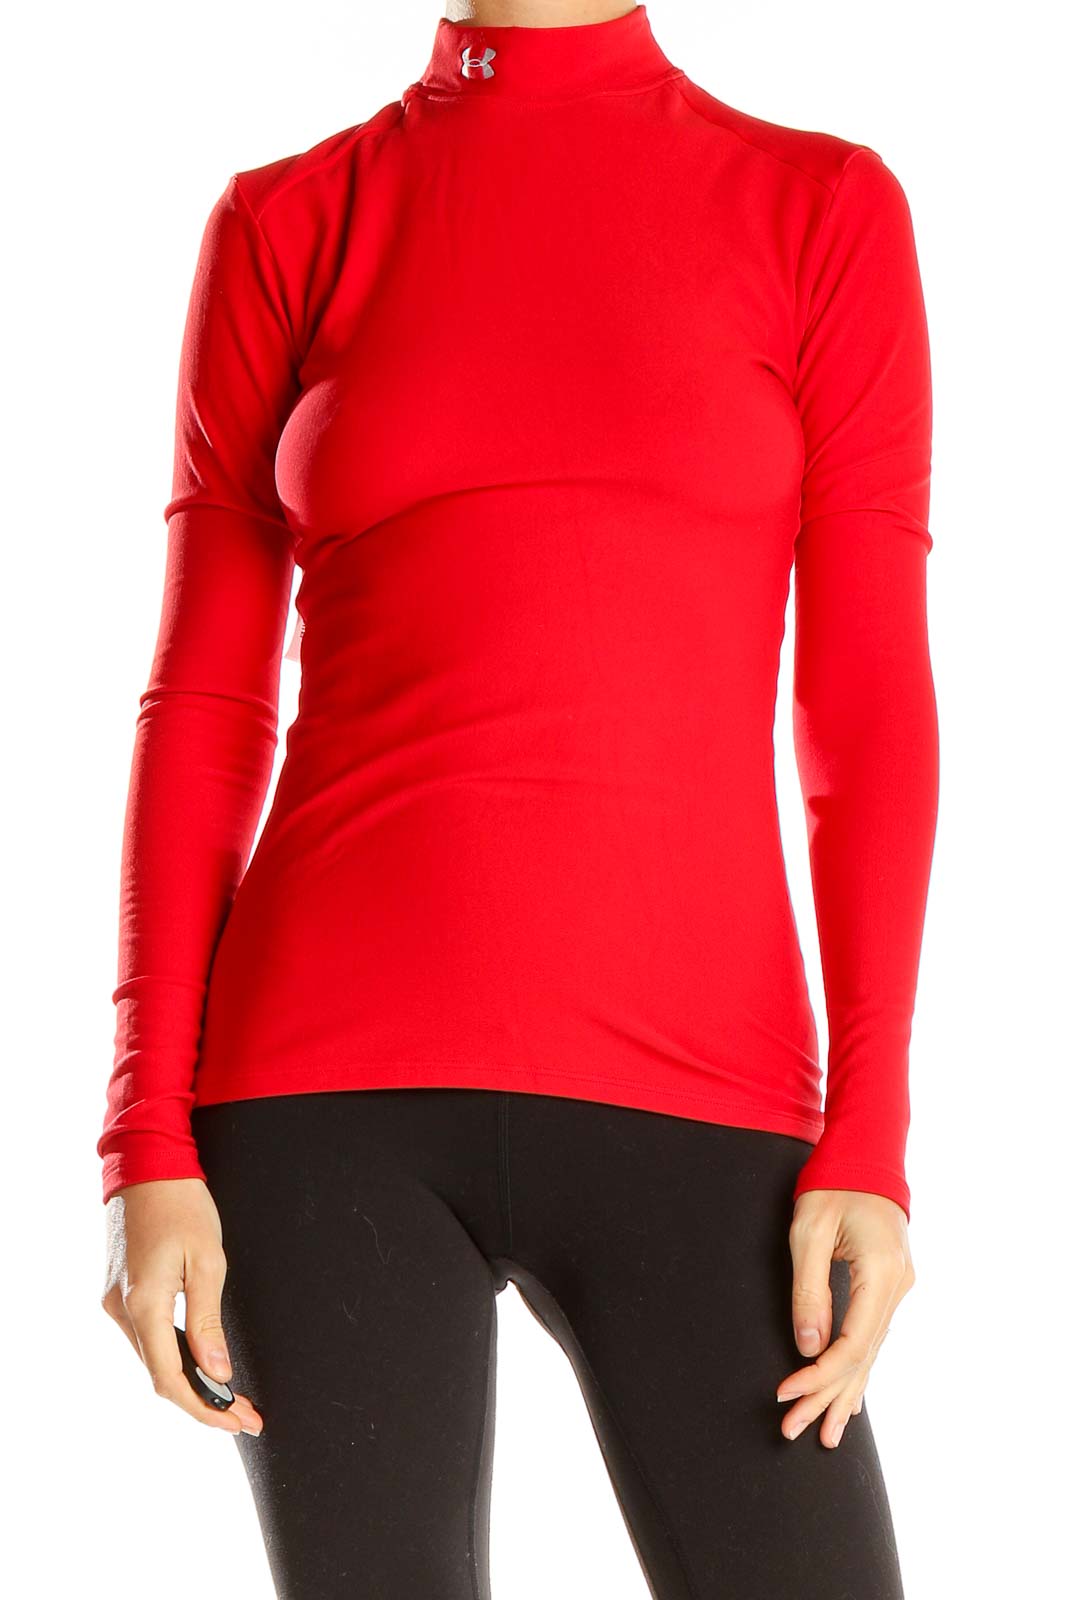 Red Activewear Top Front